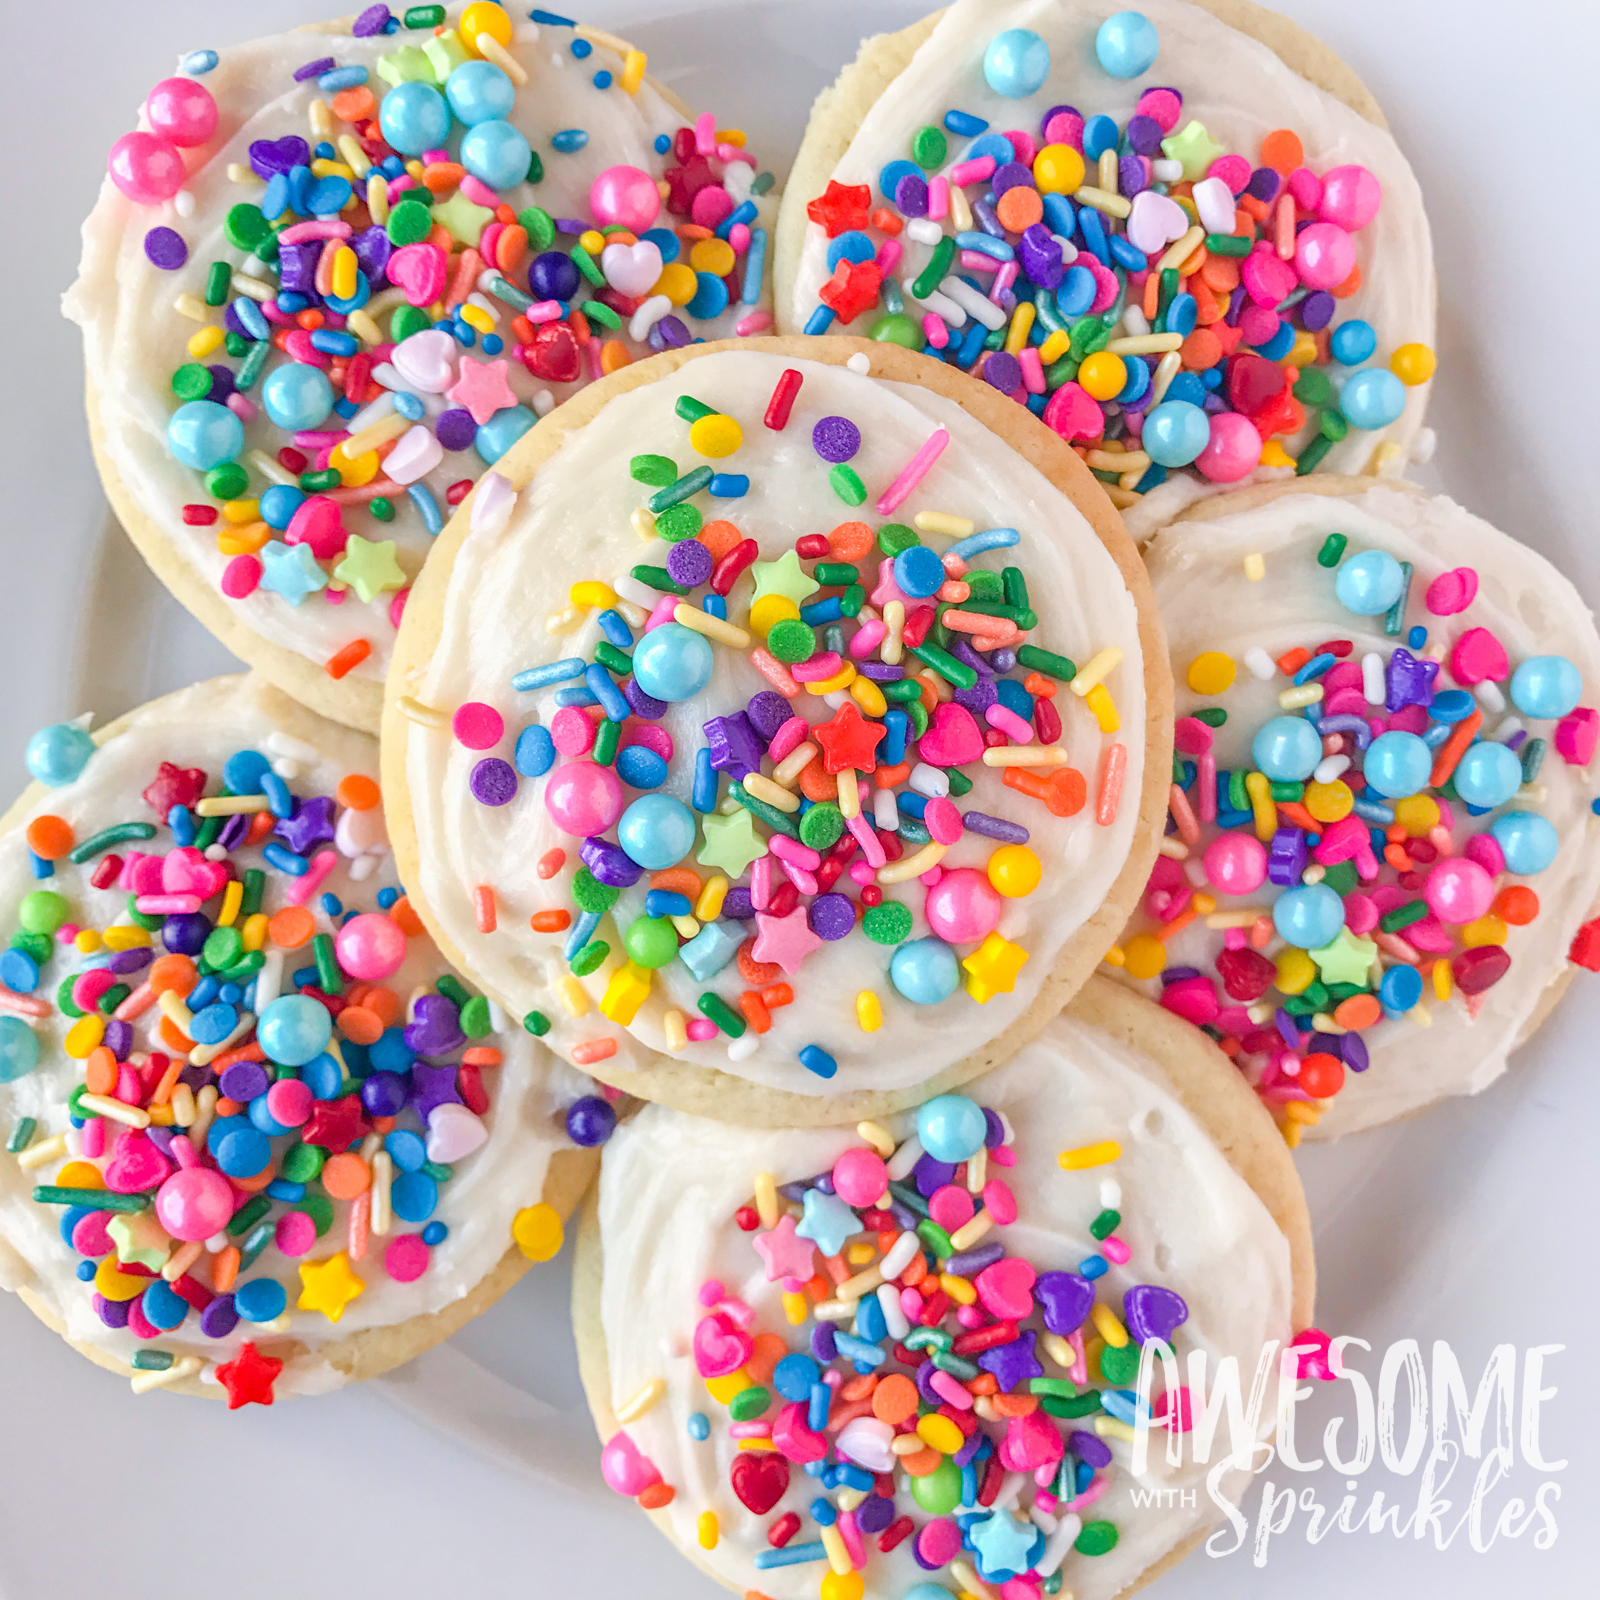 The Most Awesome Ever Sugar Cookies - Awesome with Sprinkles